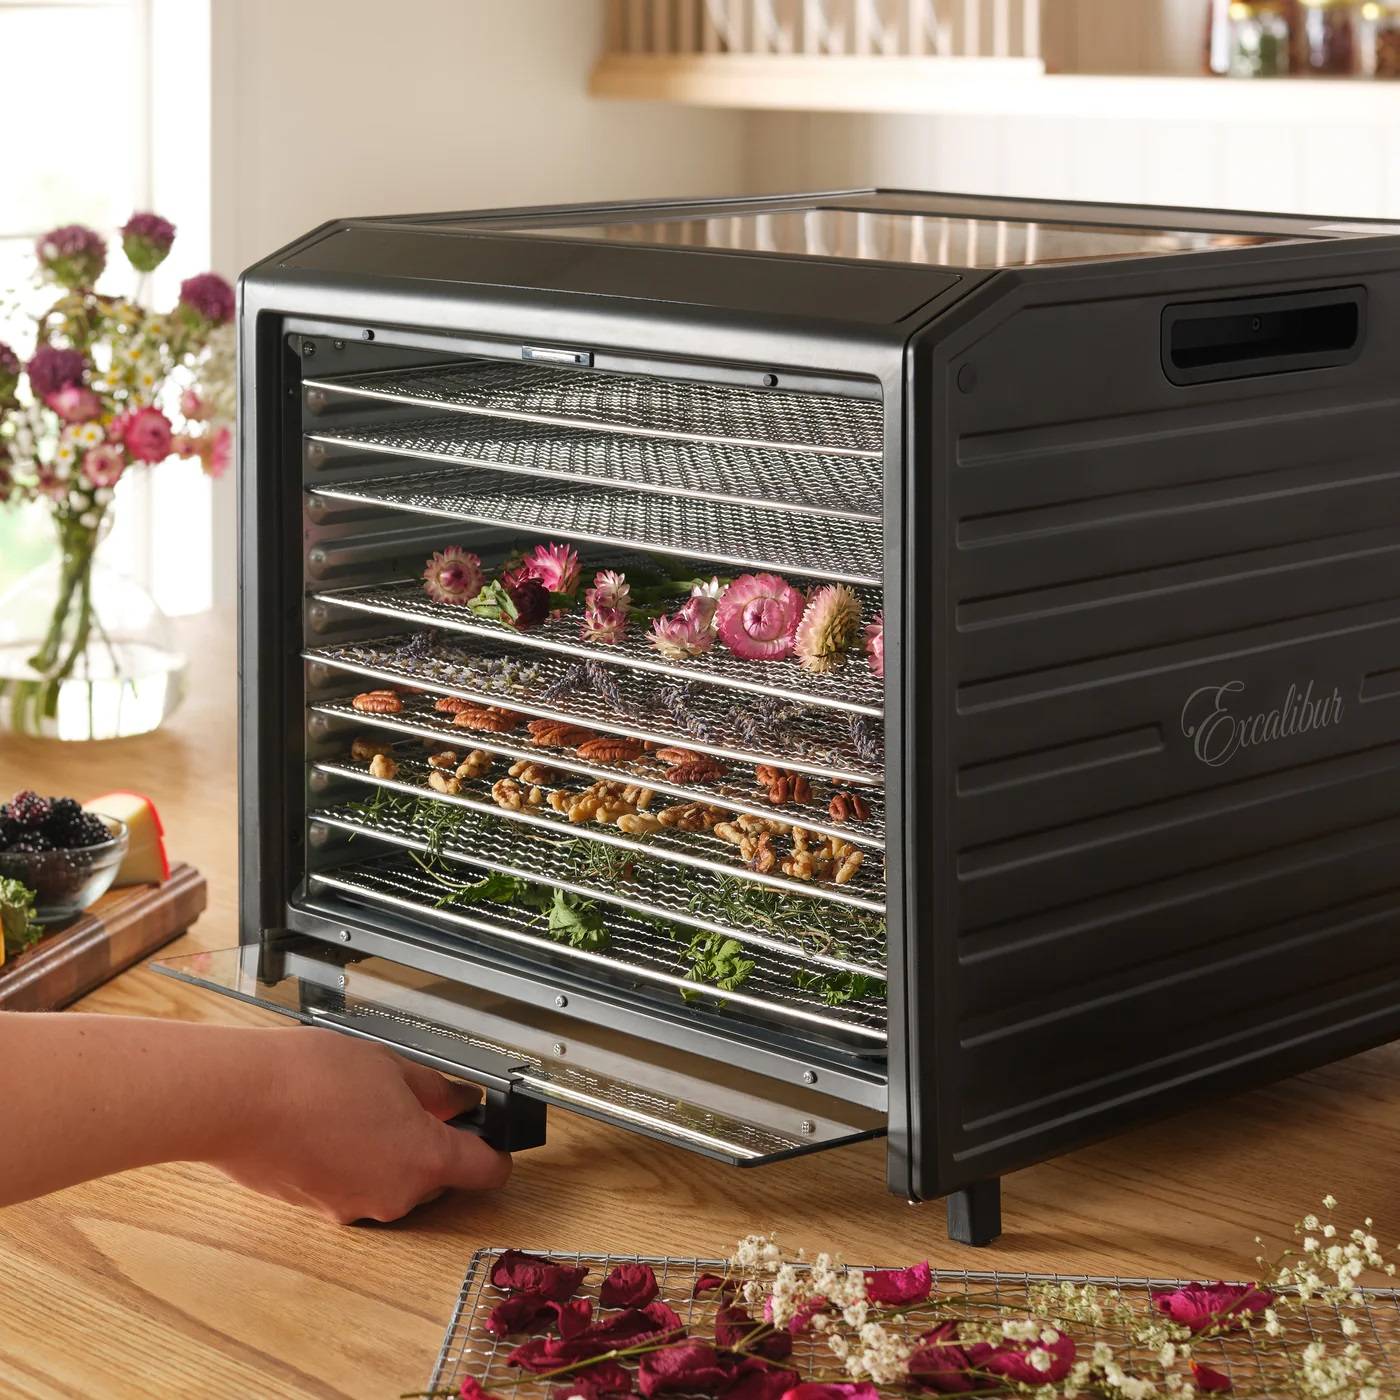 Excalibur DH10SS performance digital 10 tray stainless steel dehydrator with flowers on trays.